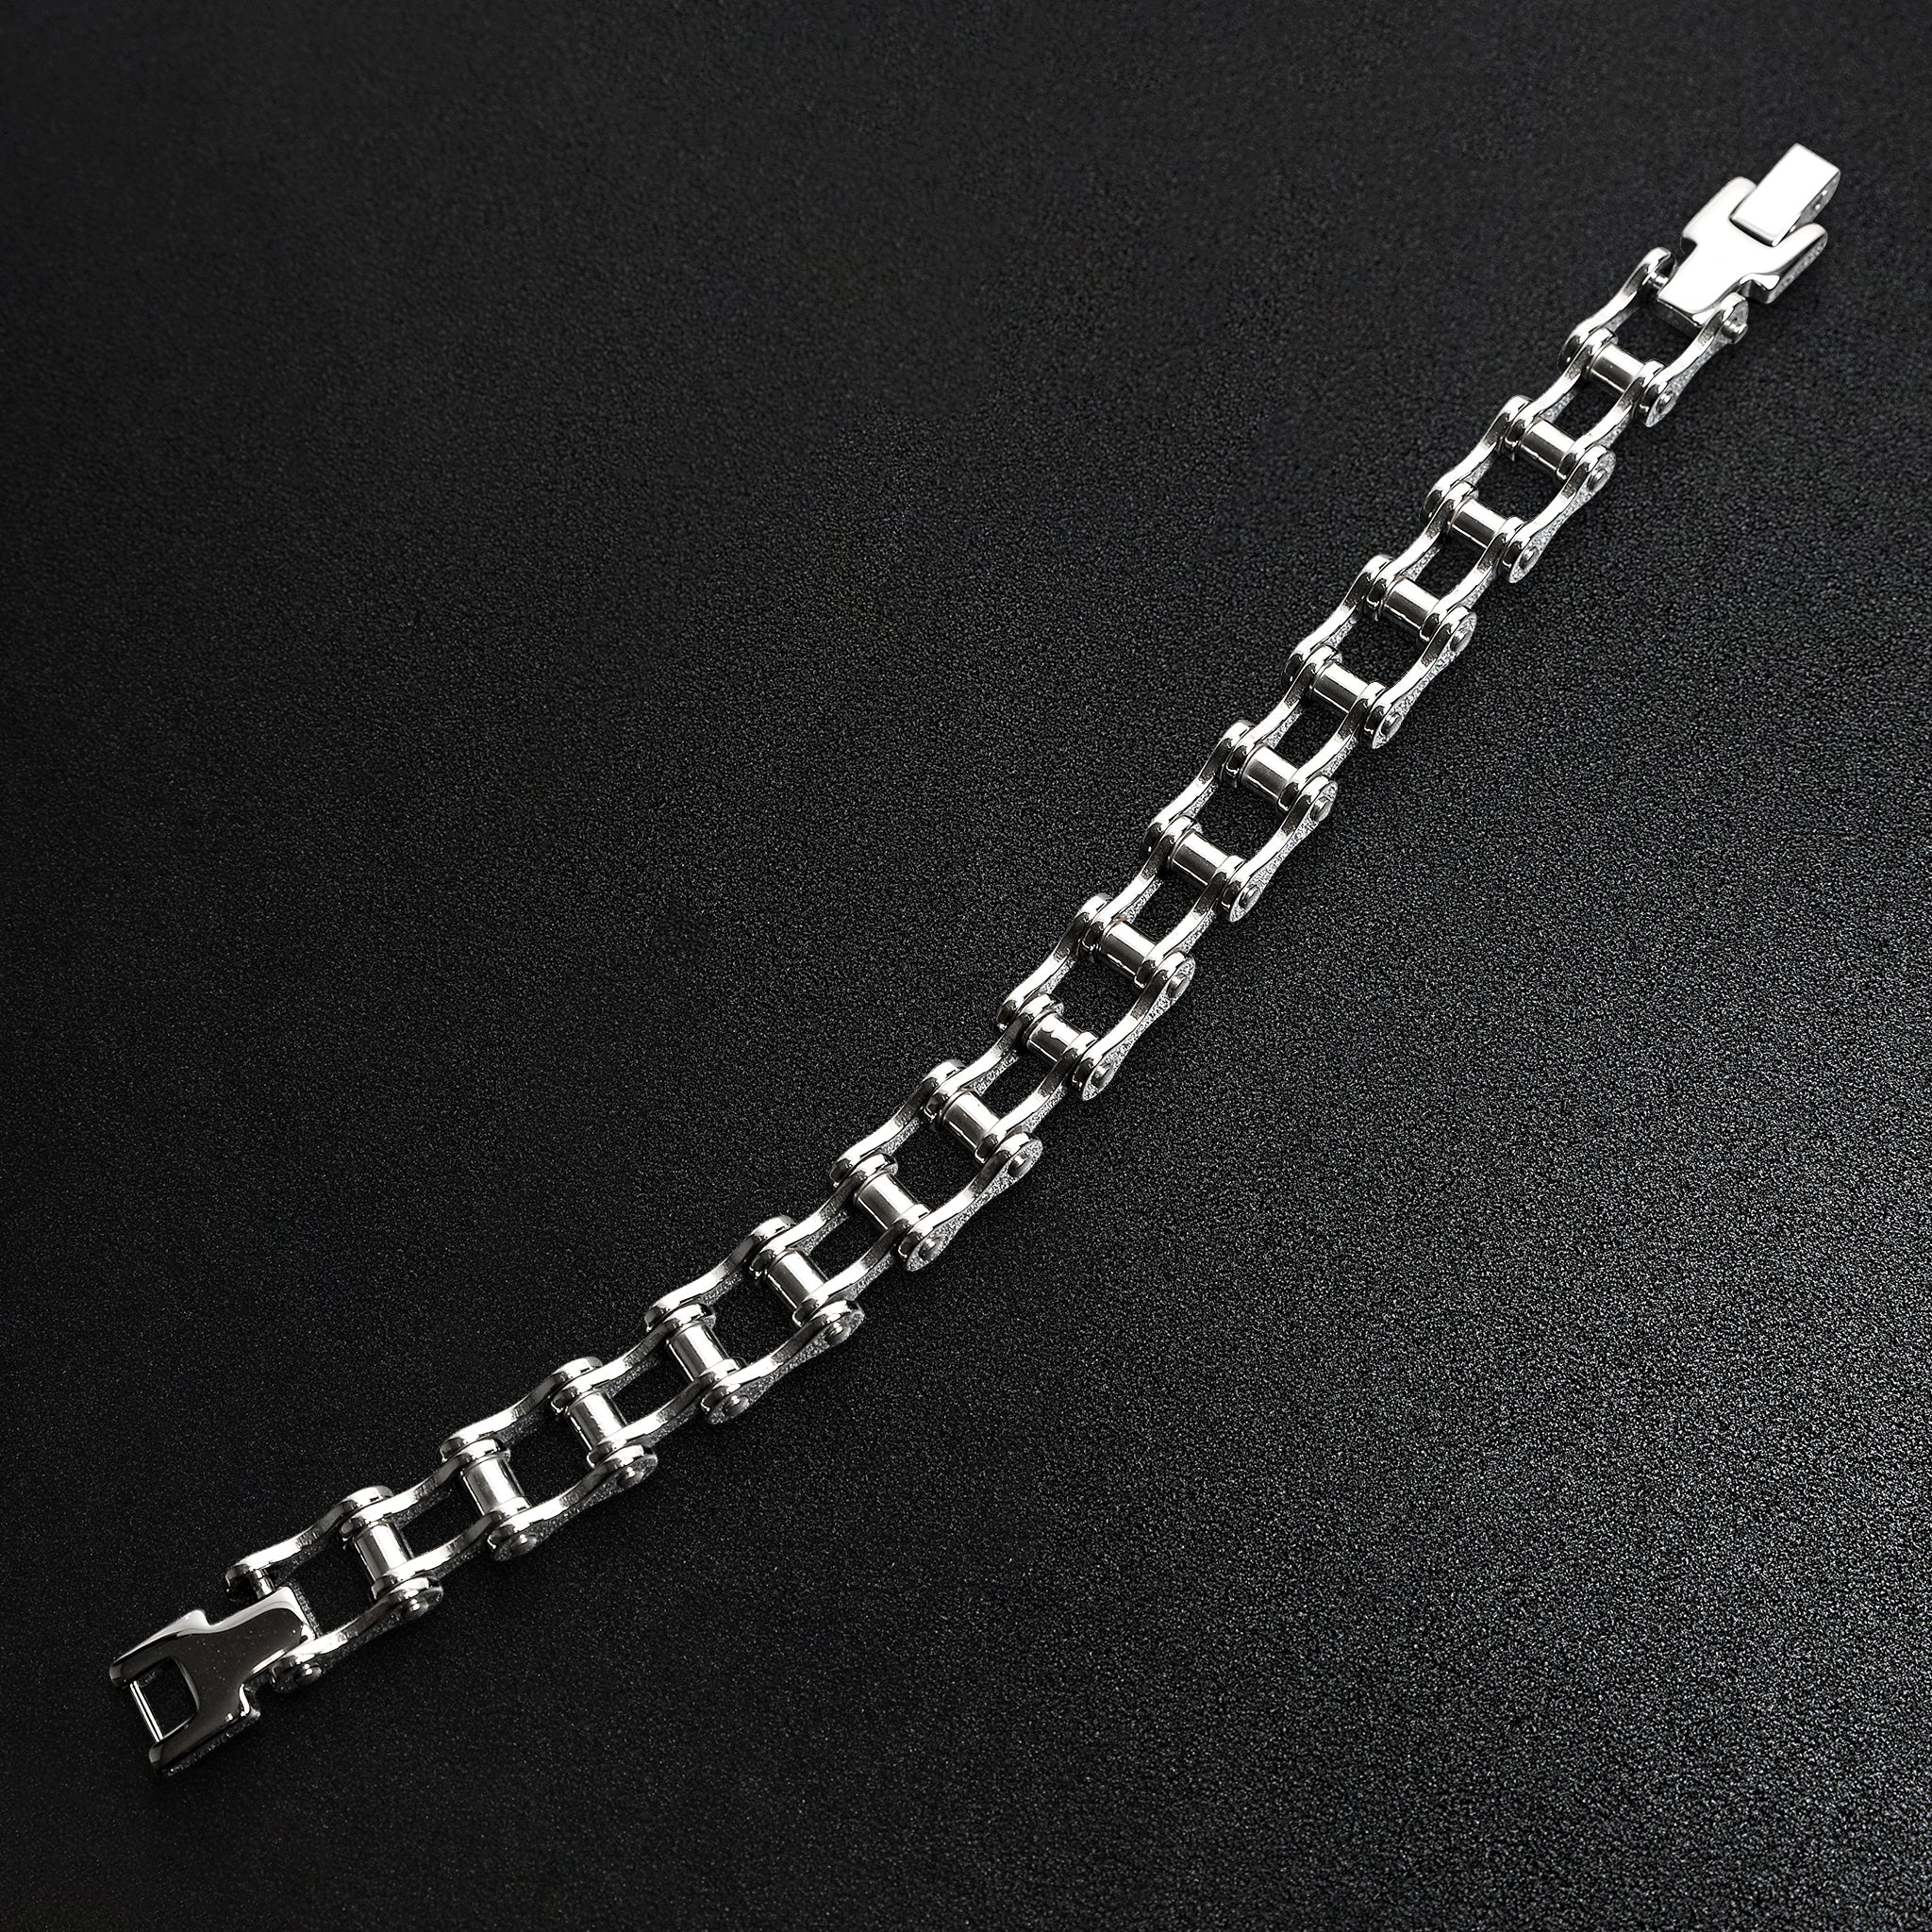 Sterling Silver Bike Chain Bracelet - Two sizes Available